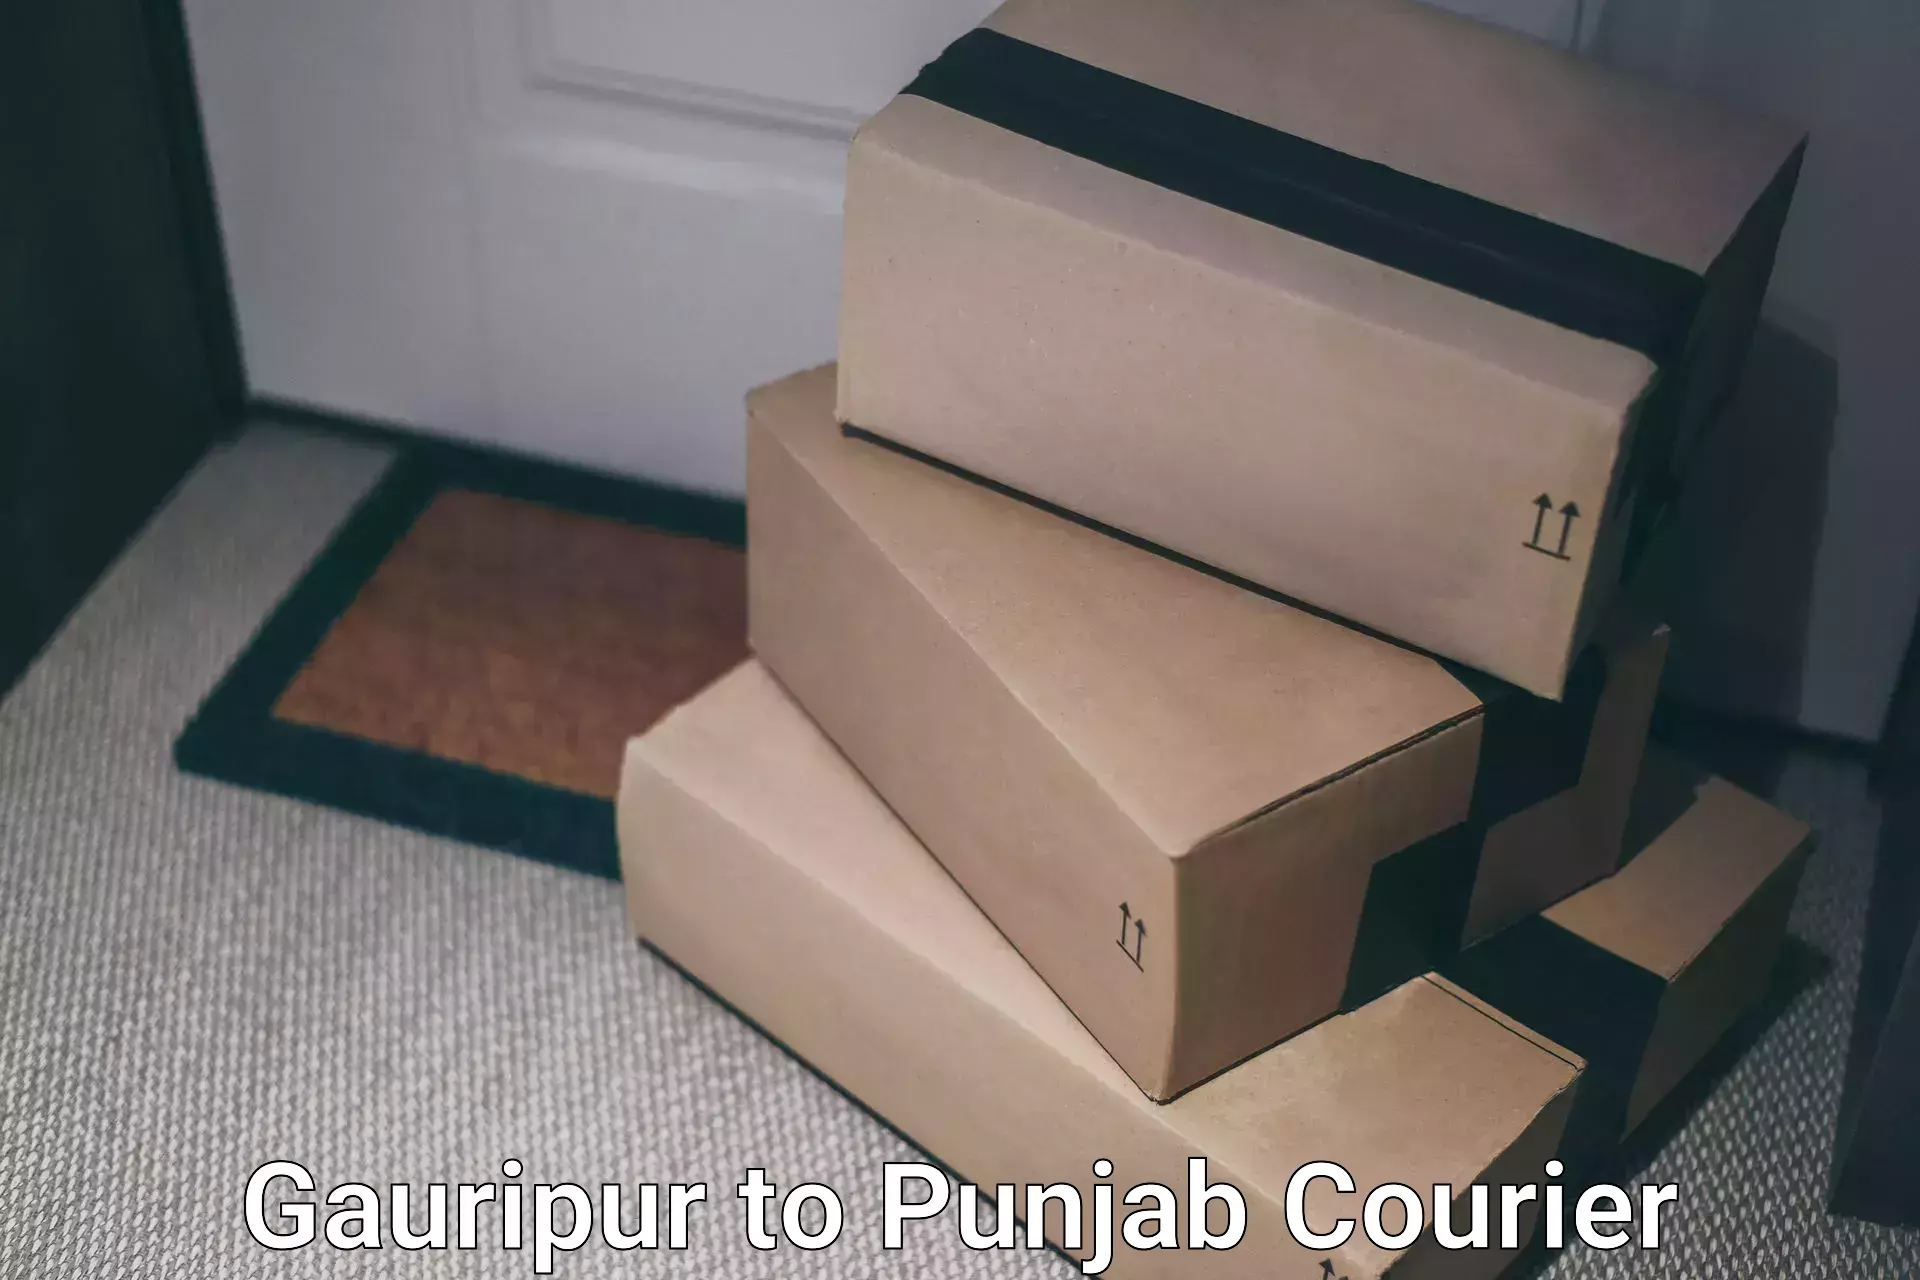 Integrated shipping solutions Gauripur to Mohali